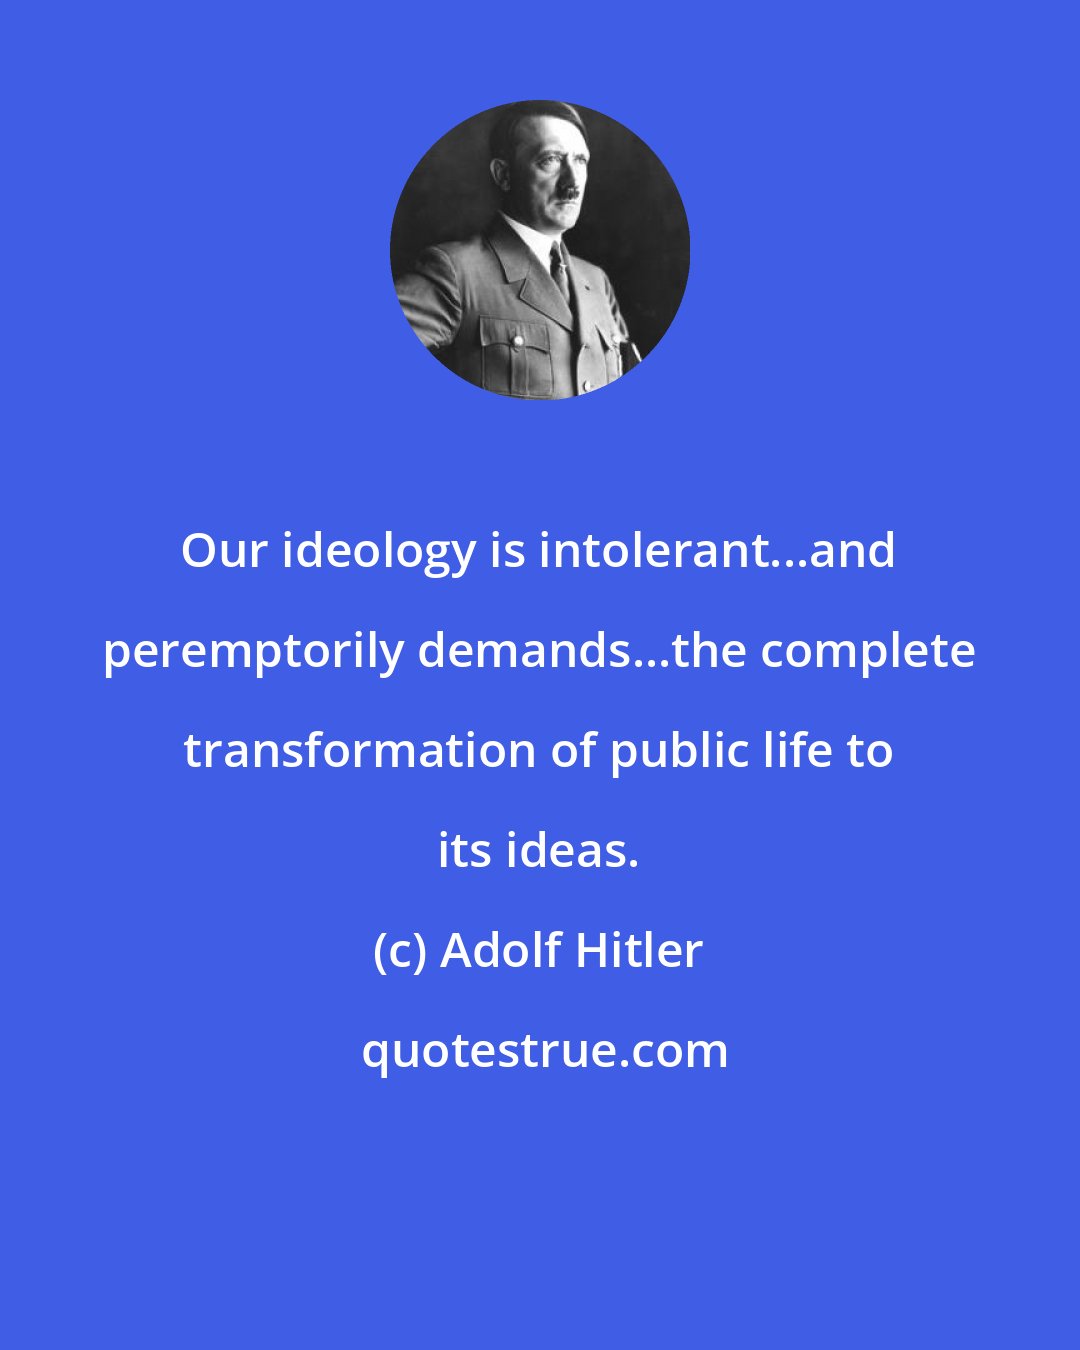 Adolf Hitler: Our ideology is intolerant...and peremptorily demands...the complete transformation of public life to its ideas.